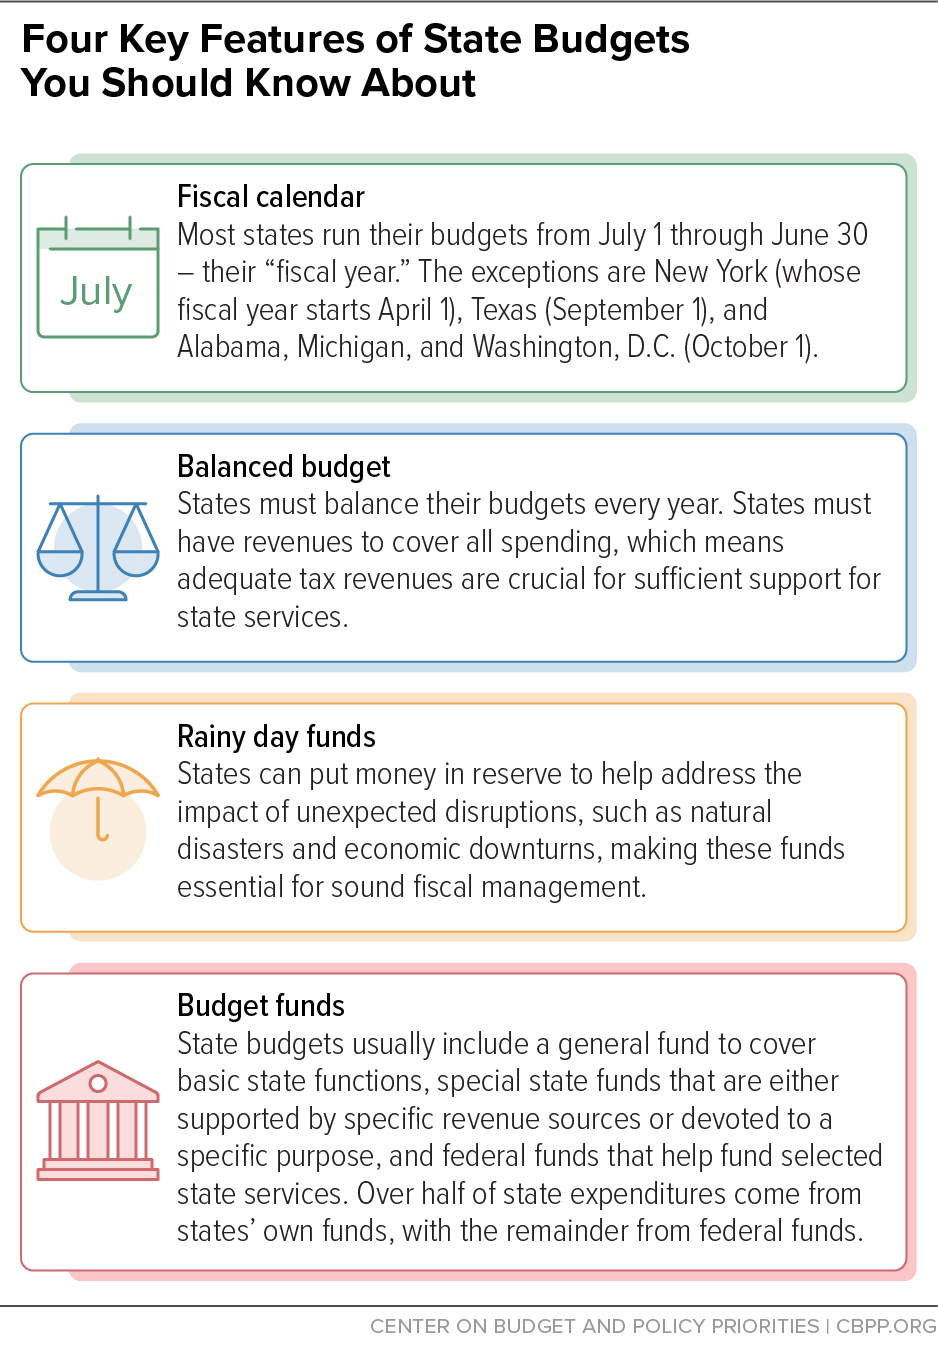 Four Key Features of State Budgets You Should Know About